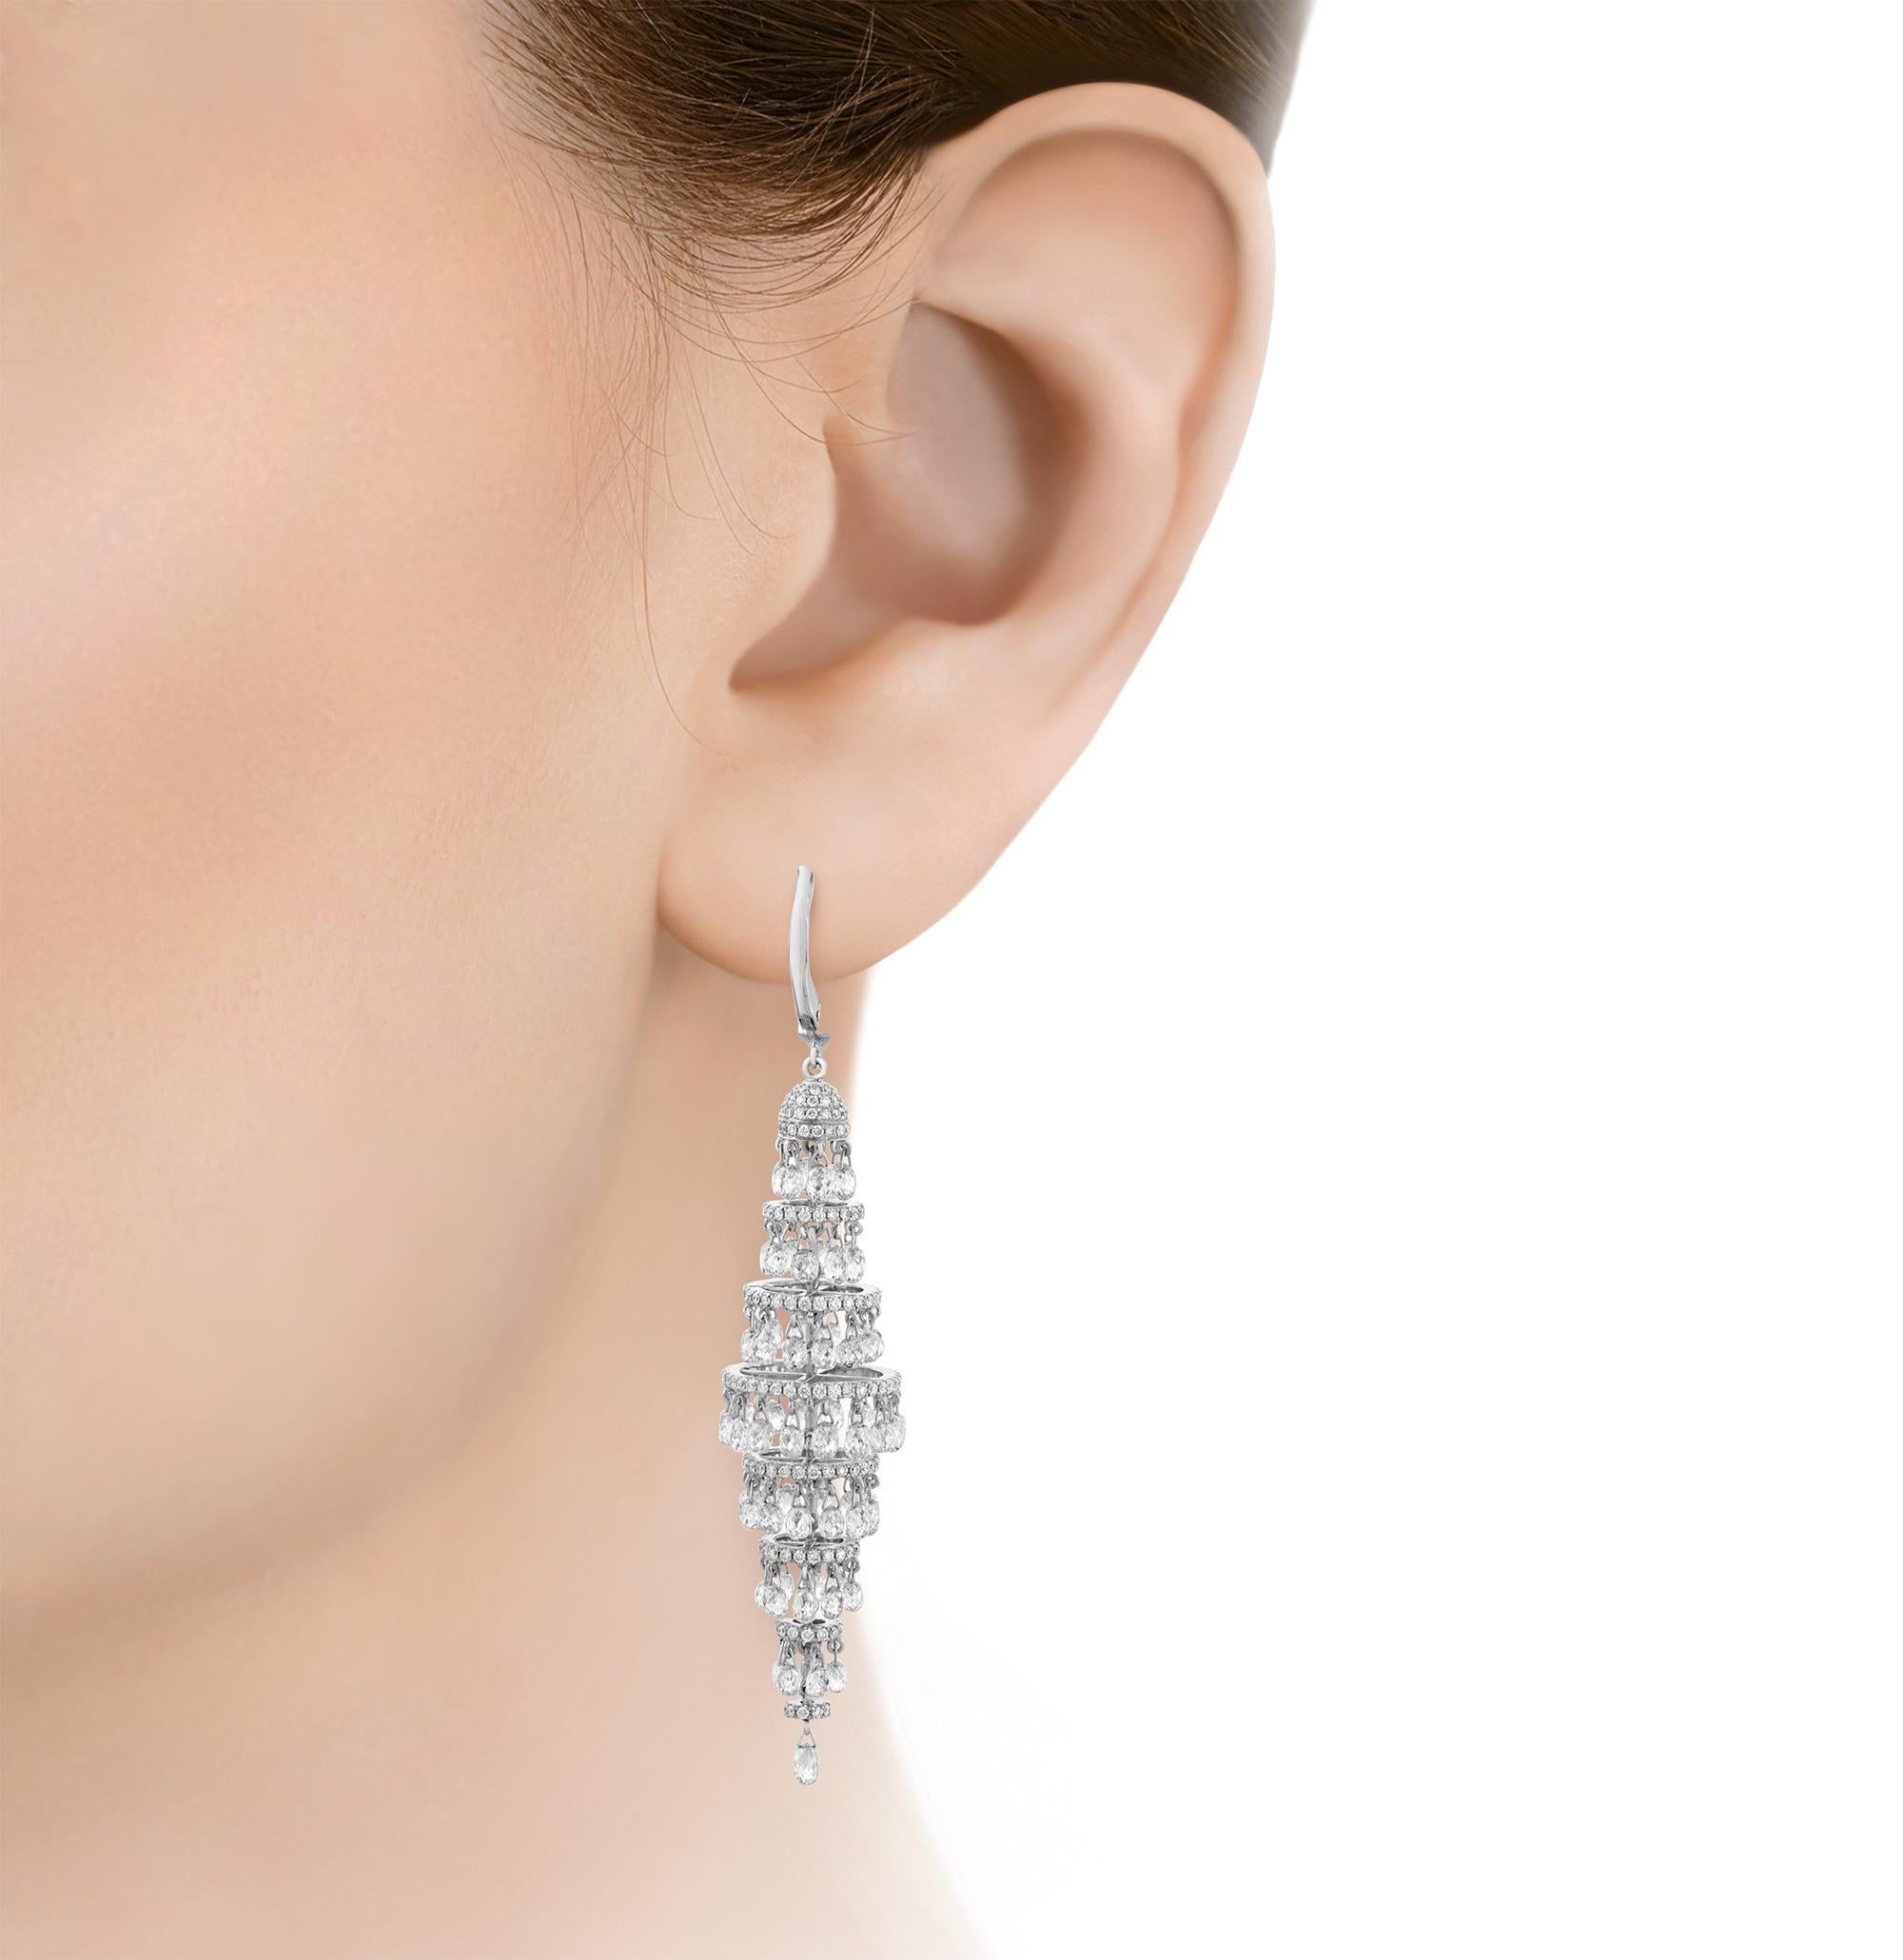 Exuding timeless luxury, this radiant pair of chandelier earrings features an impressive array of round brilliant and briolette cut diamonds totaling 19.83 carats. The dazzling stones artfully cascade in a lustrous 18K white gold setting.